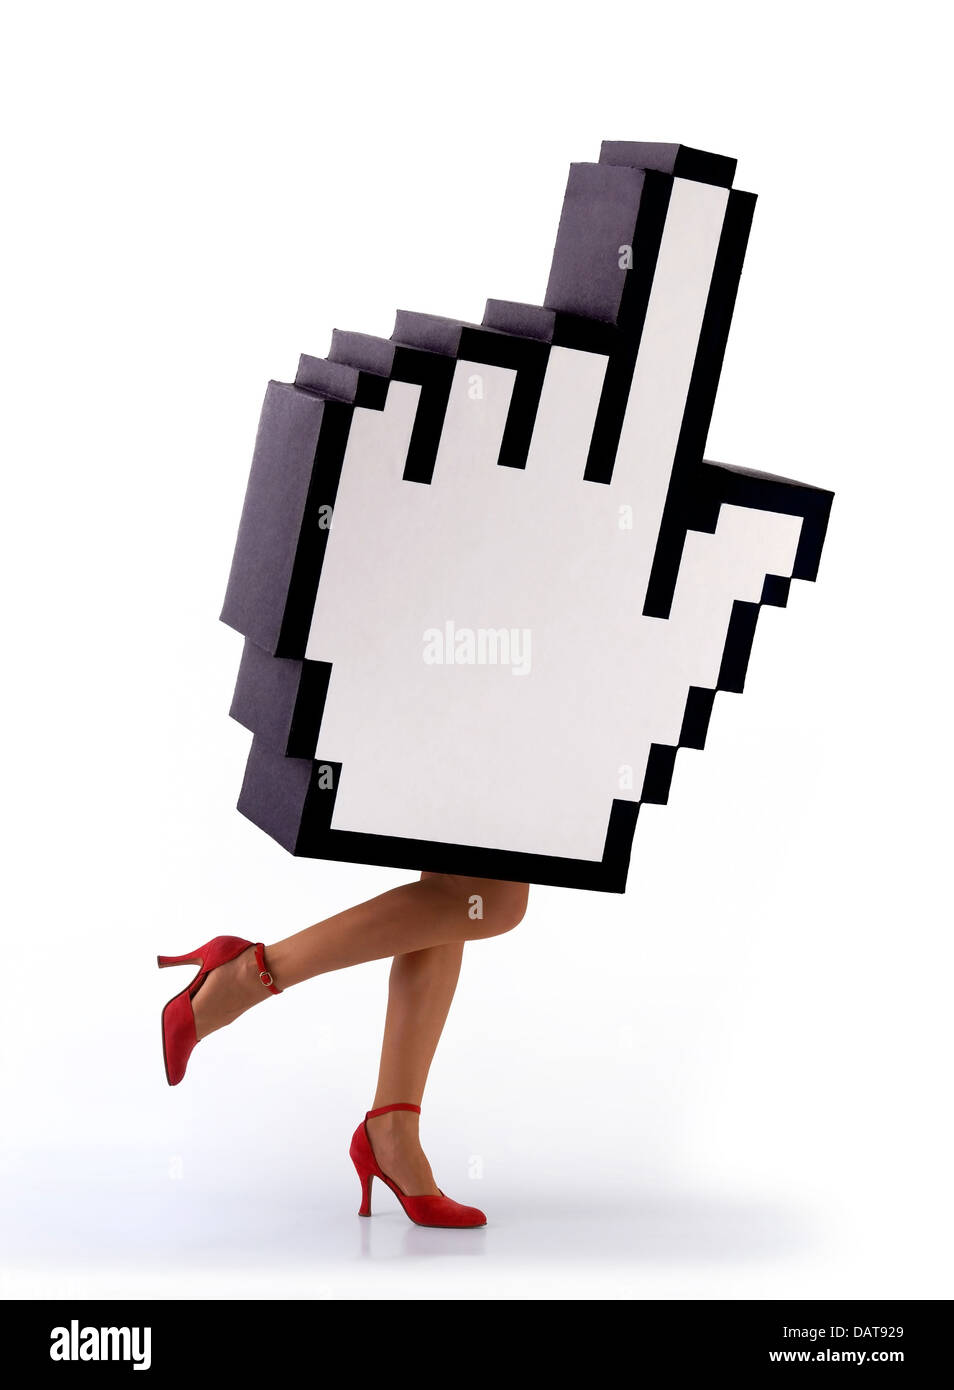 E-commerce hand cursor with legs of a woman running Stock Photo